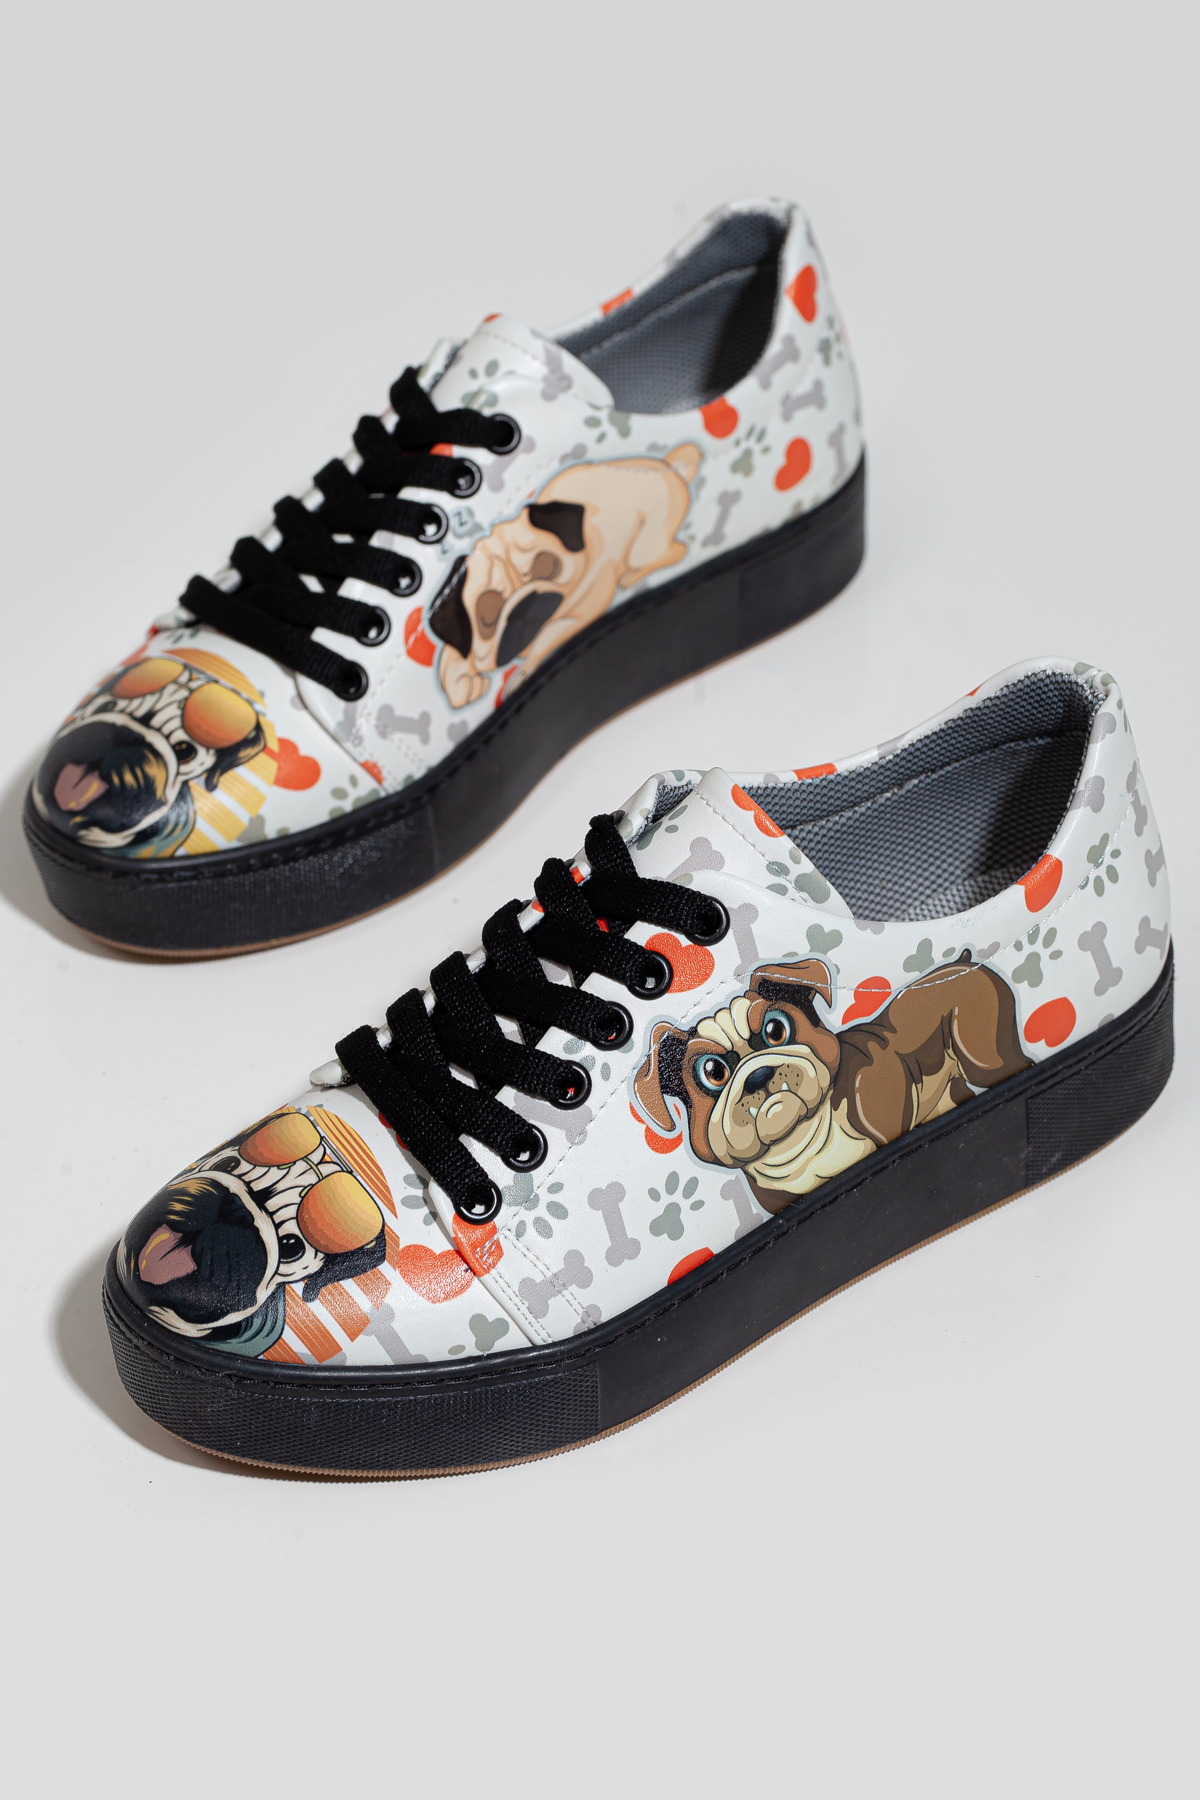 DOG DESIGN SNEAKERS SHOES